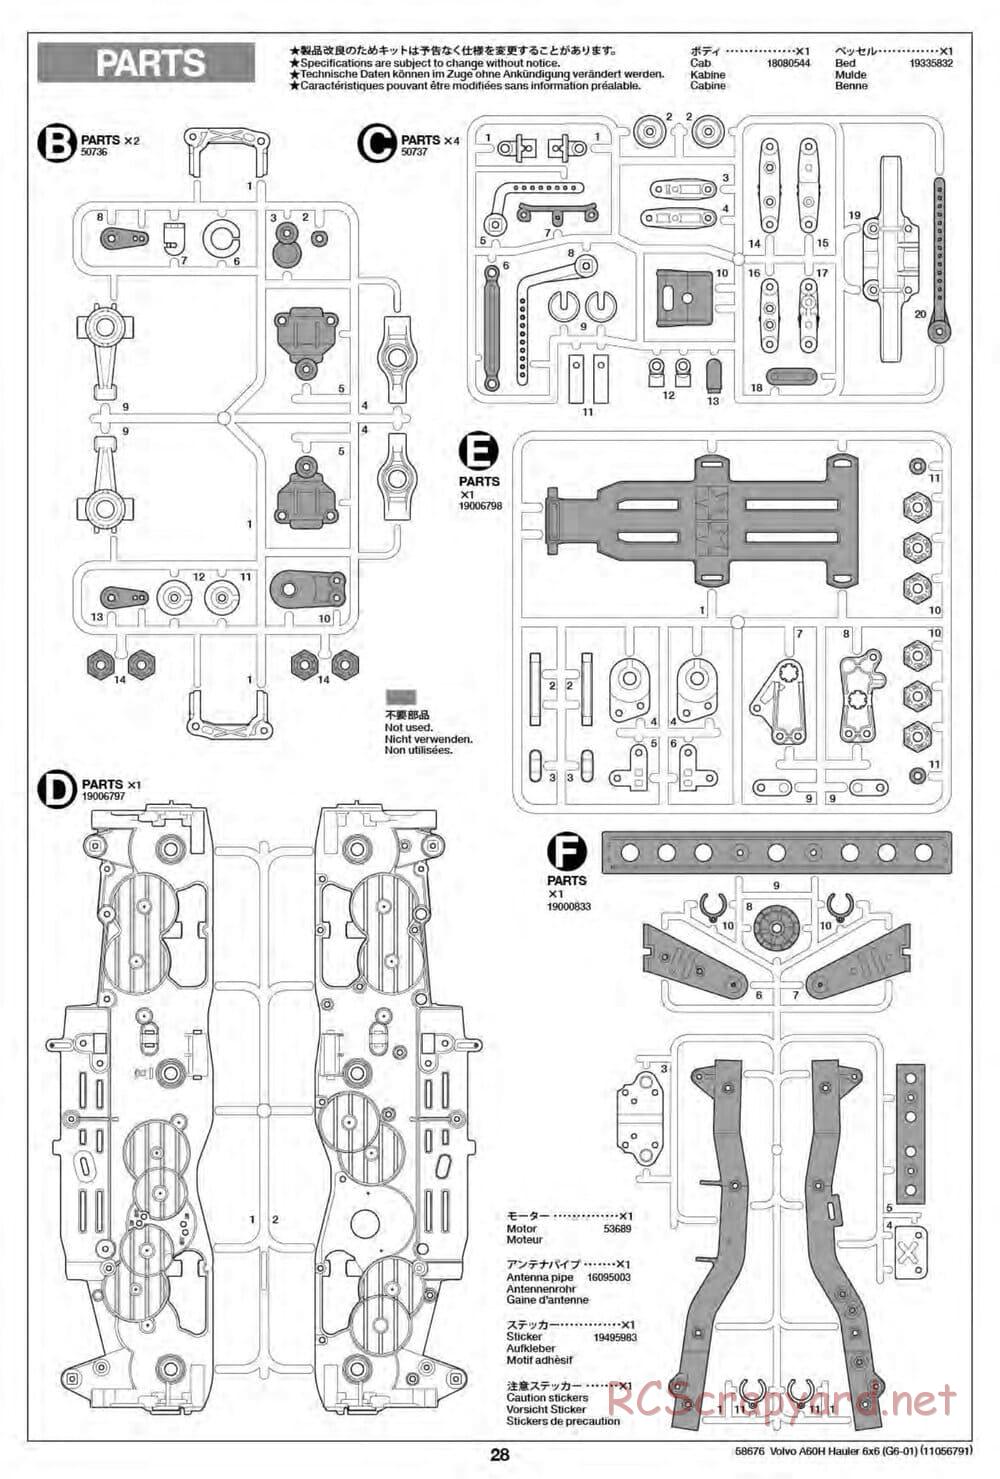 Tamiya - Volvo A60H Dump Truck 6x6 - G6-01 Chassis - Manual - Page 27